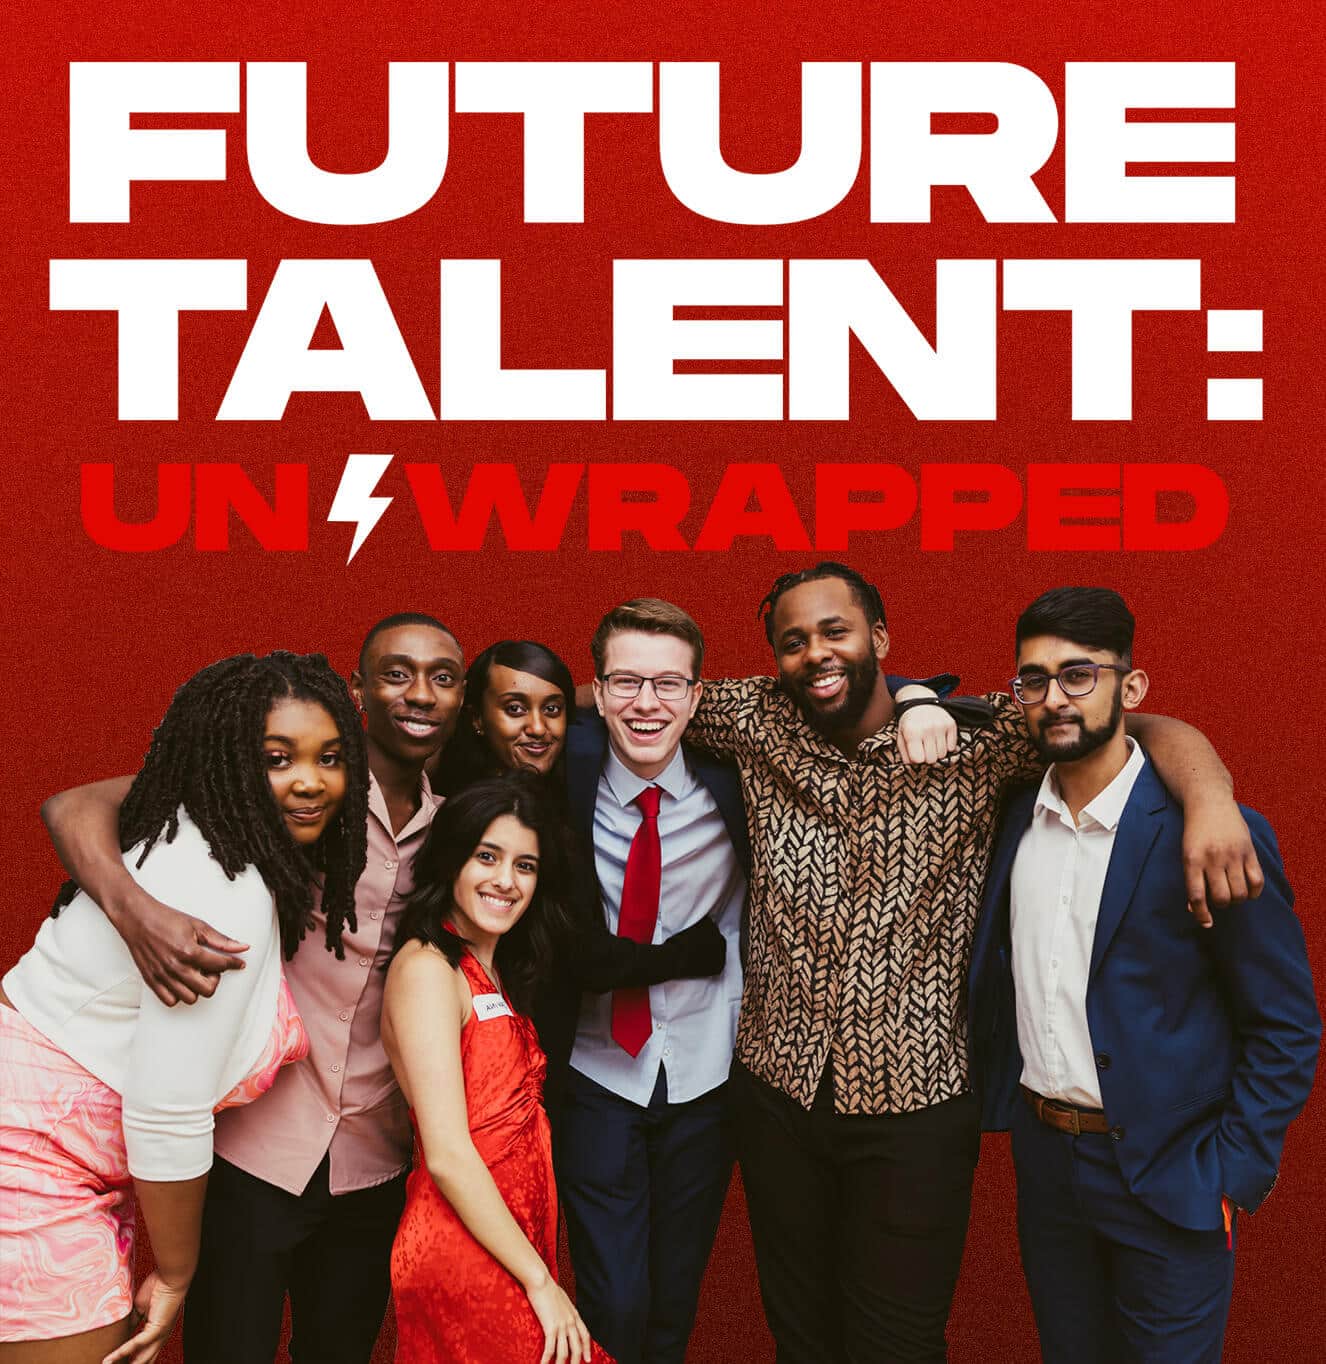 Future Talent Unwrapped with happy students with arms around each other smiling